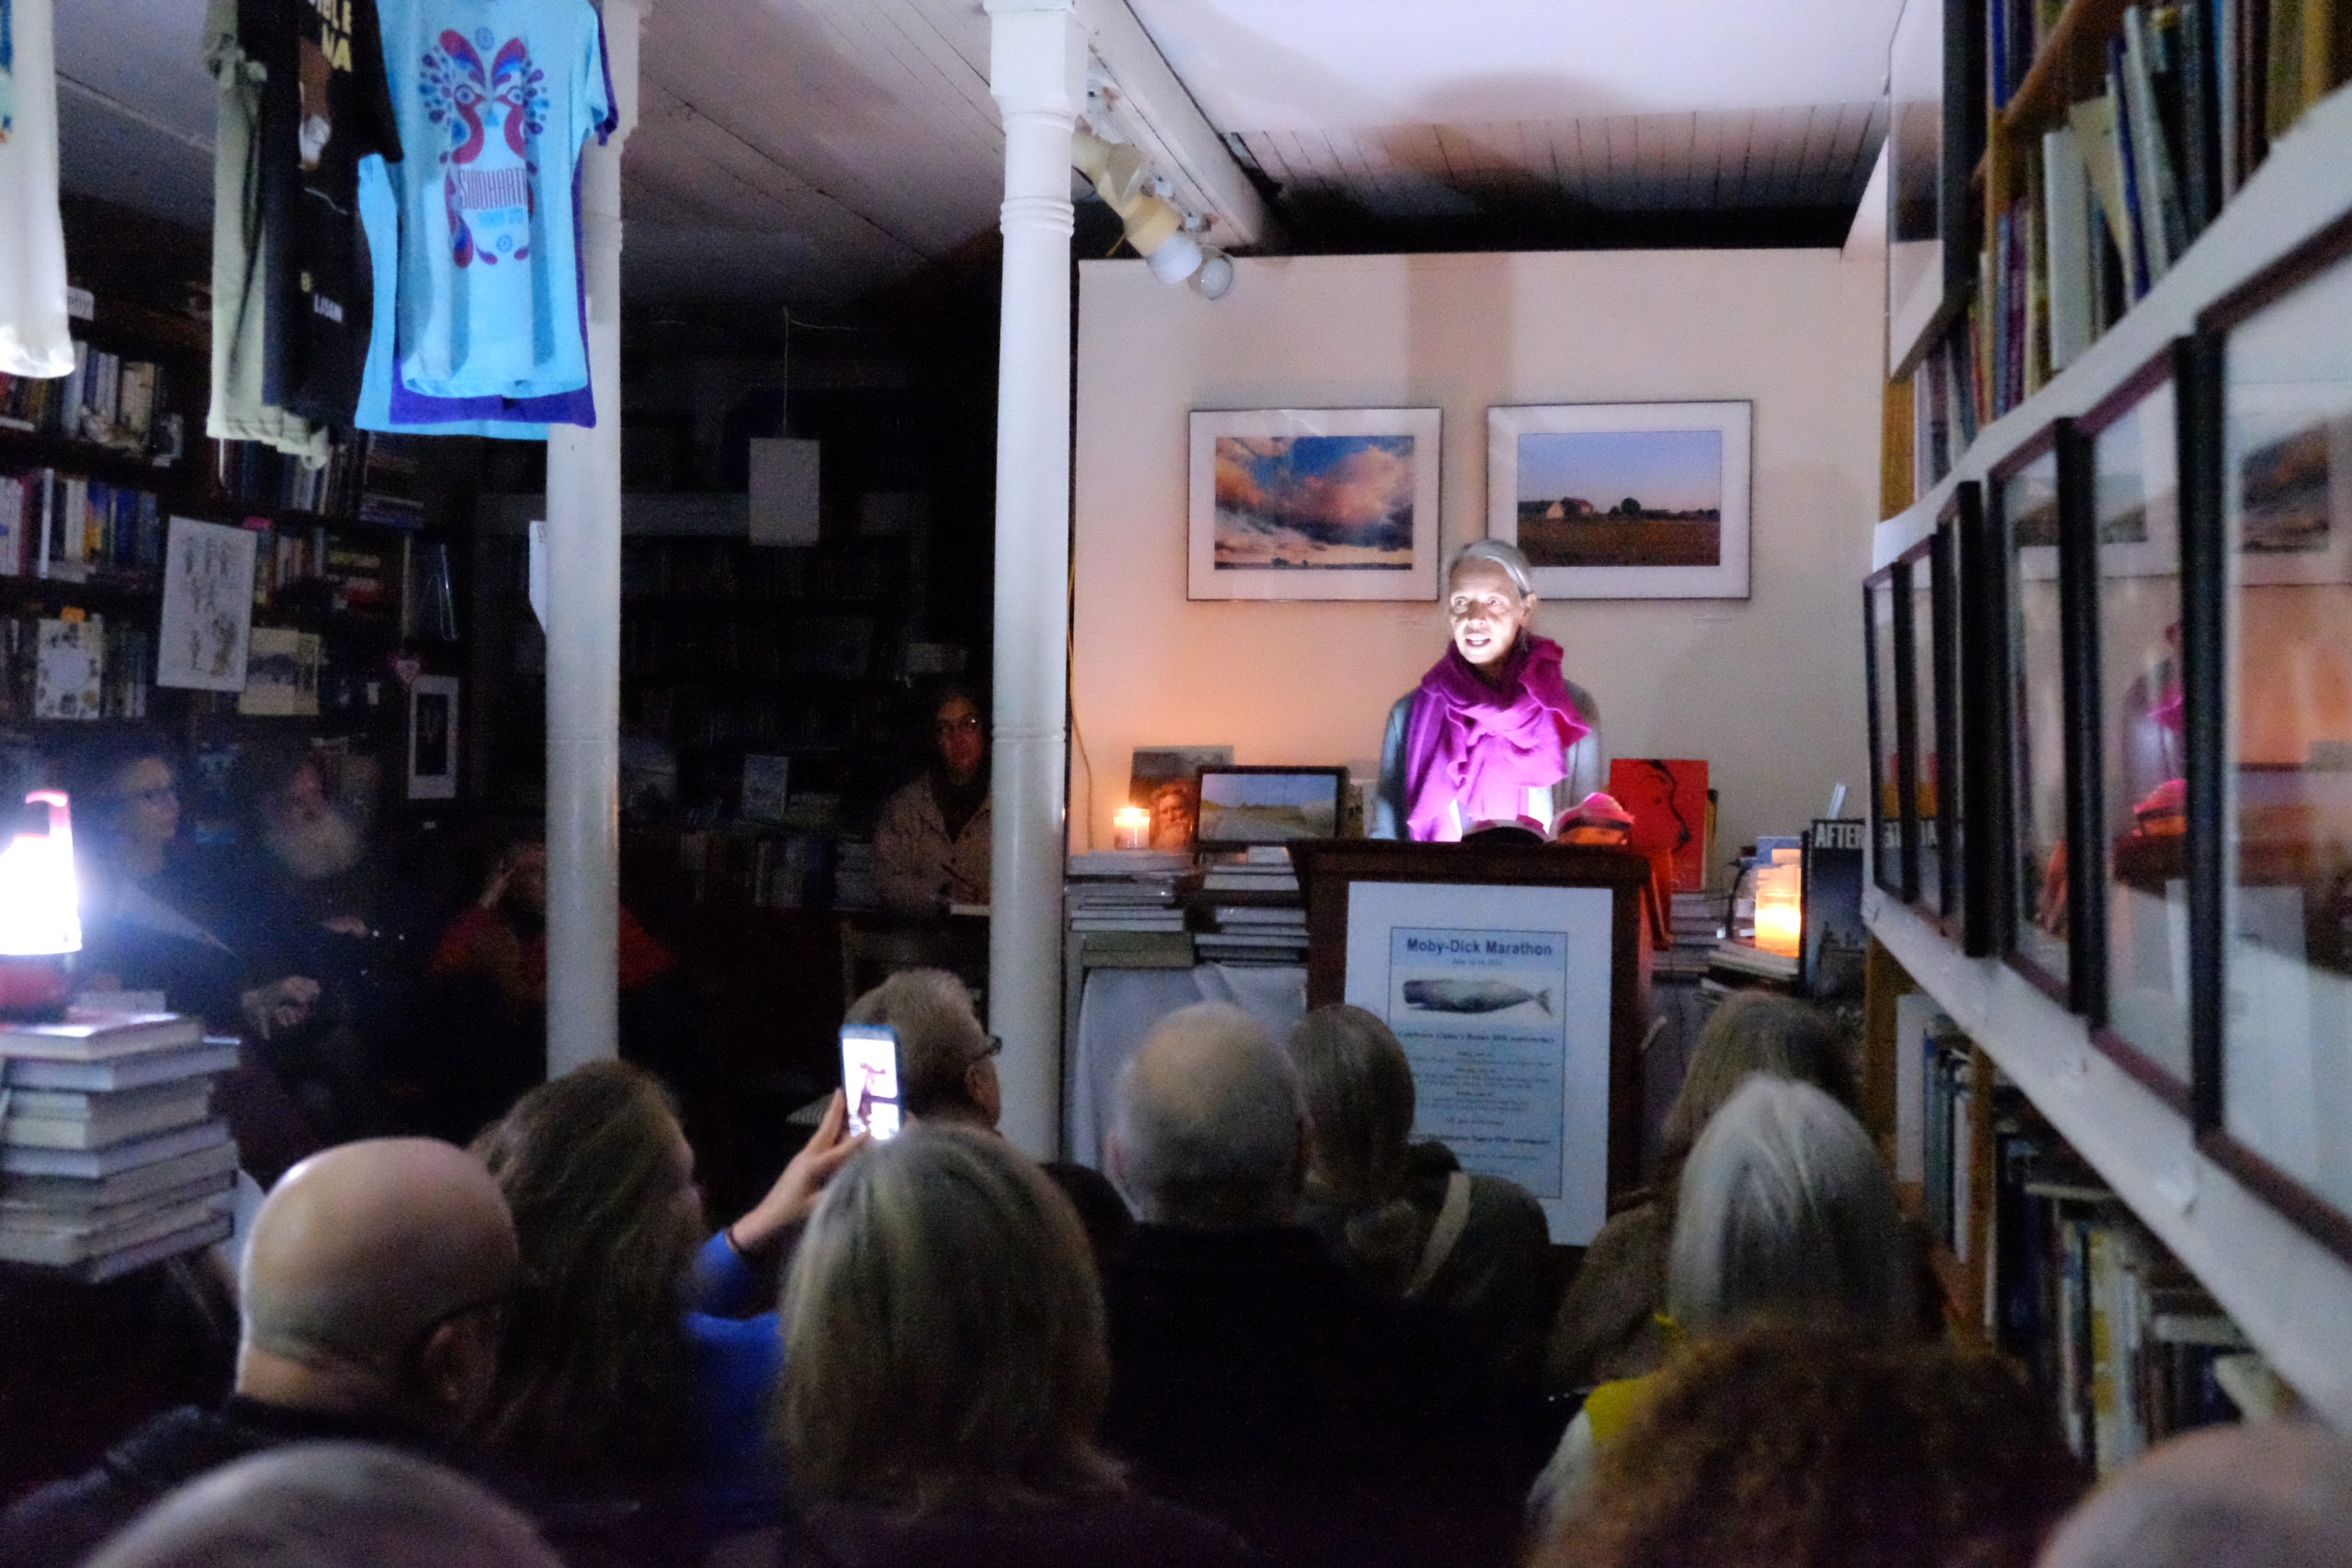 A power failure did not deter Megan Chaskey from her reading at Canio's in January 2016. KATHRYN SZOKA